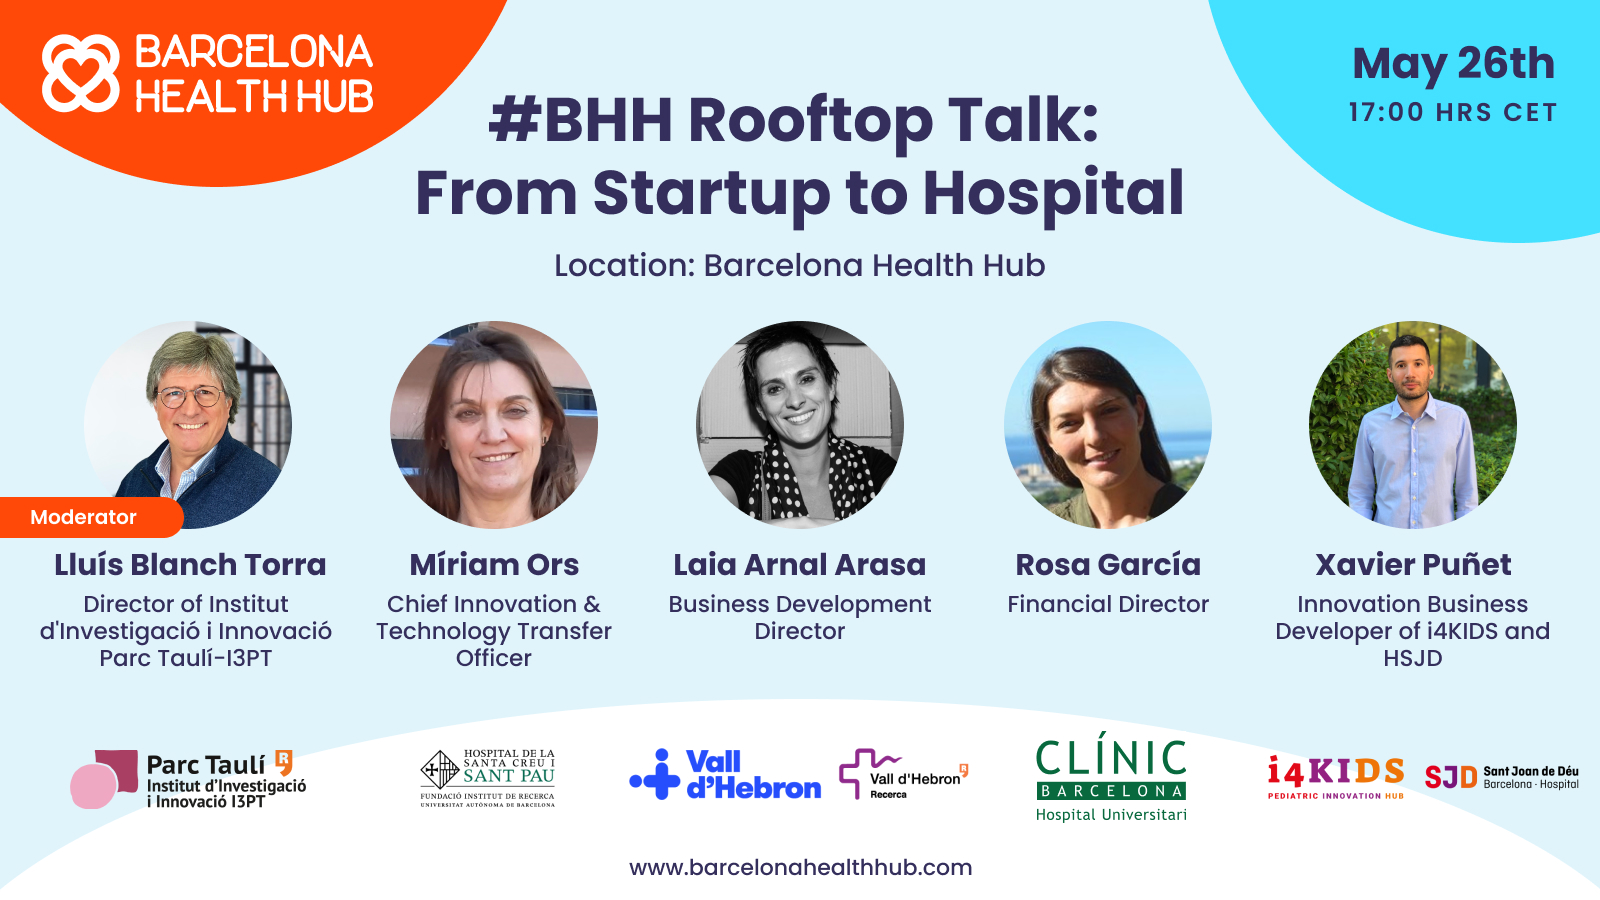 Join the next #BHH Rooftop Talk about 